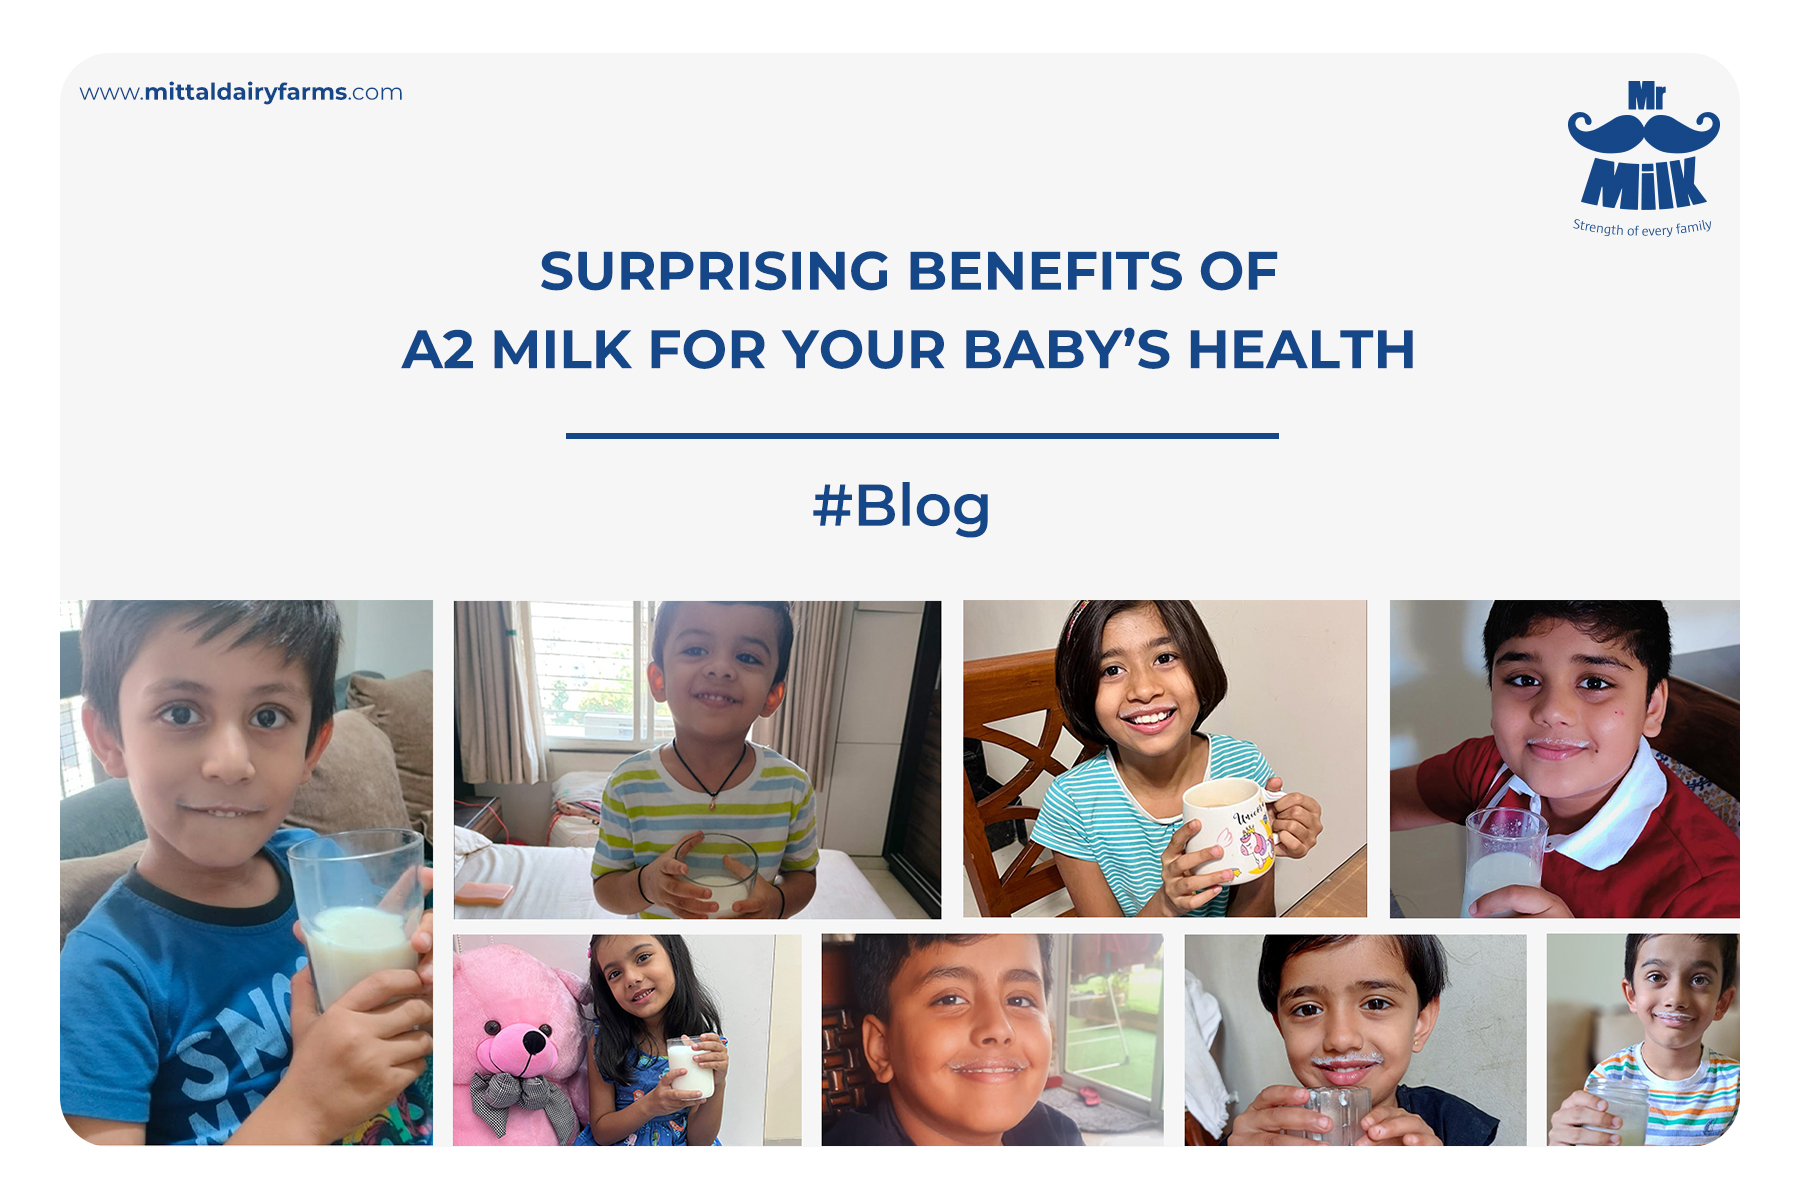 SURPRISING BENEFITS OF A2 MILK FOR YOUR BABY’S HEALTH.